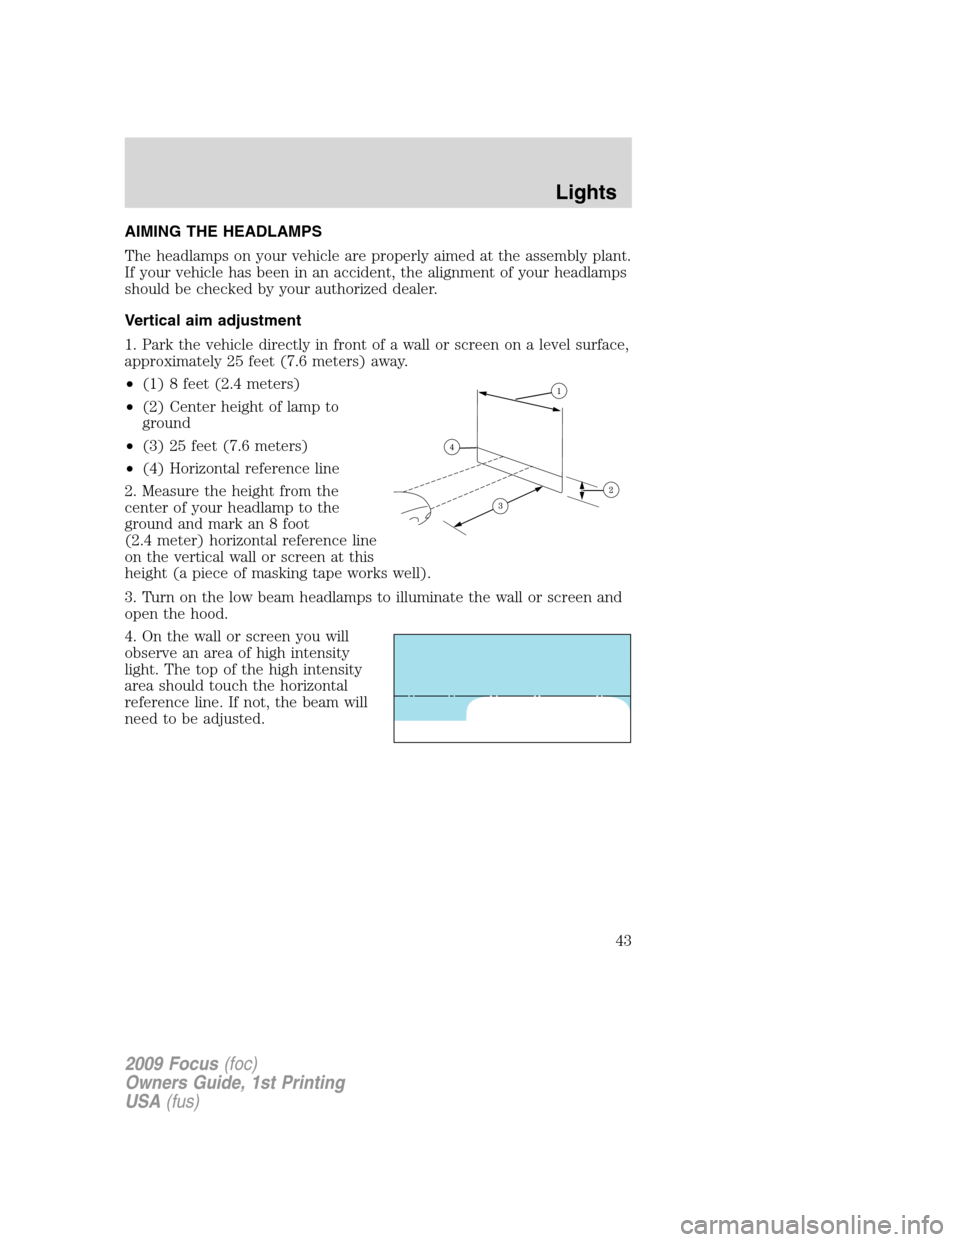 FORD FOCUS 2009 2.G Service Manual AIMING THE HEADLAMPS
The headlamps on your vehicle are properly aimed at the assembly plant.
If your vehicle has been in an accident, the alignment of your headlamps
should be checked by your authoriz